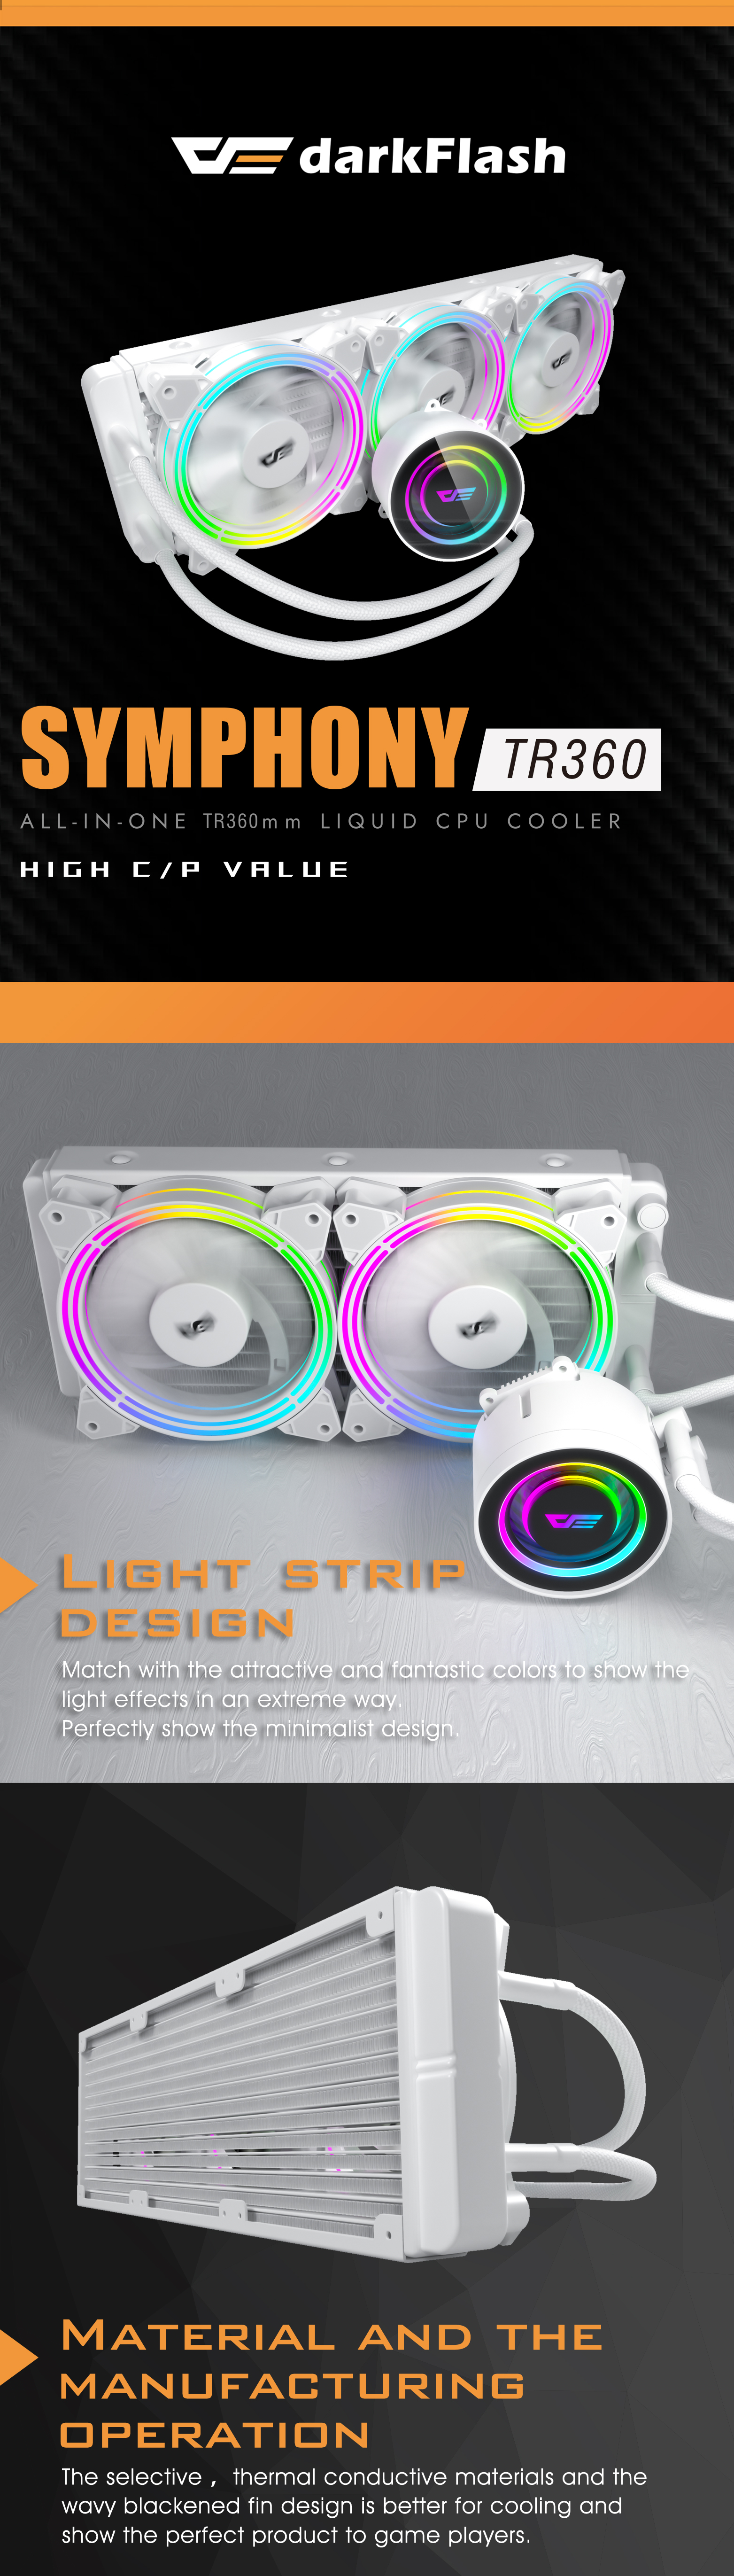 darkFlash TR360 white water cooler aio liquid cooling system